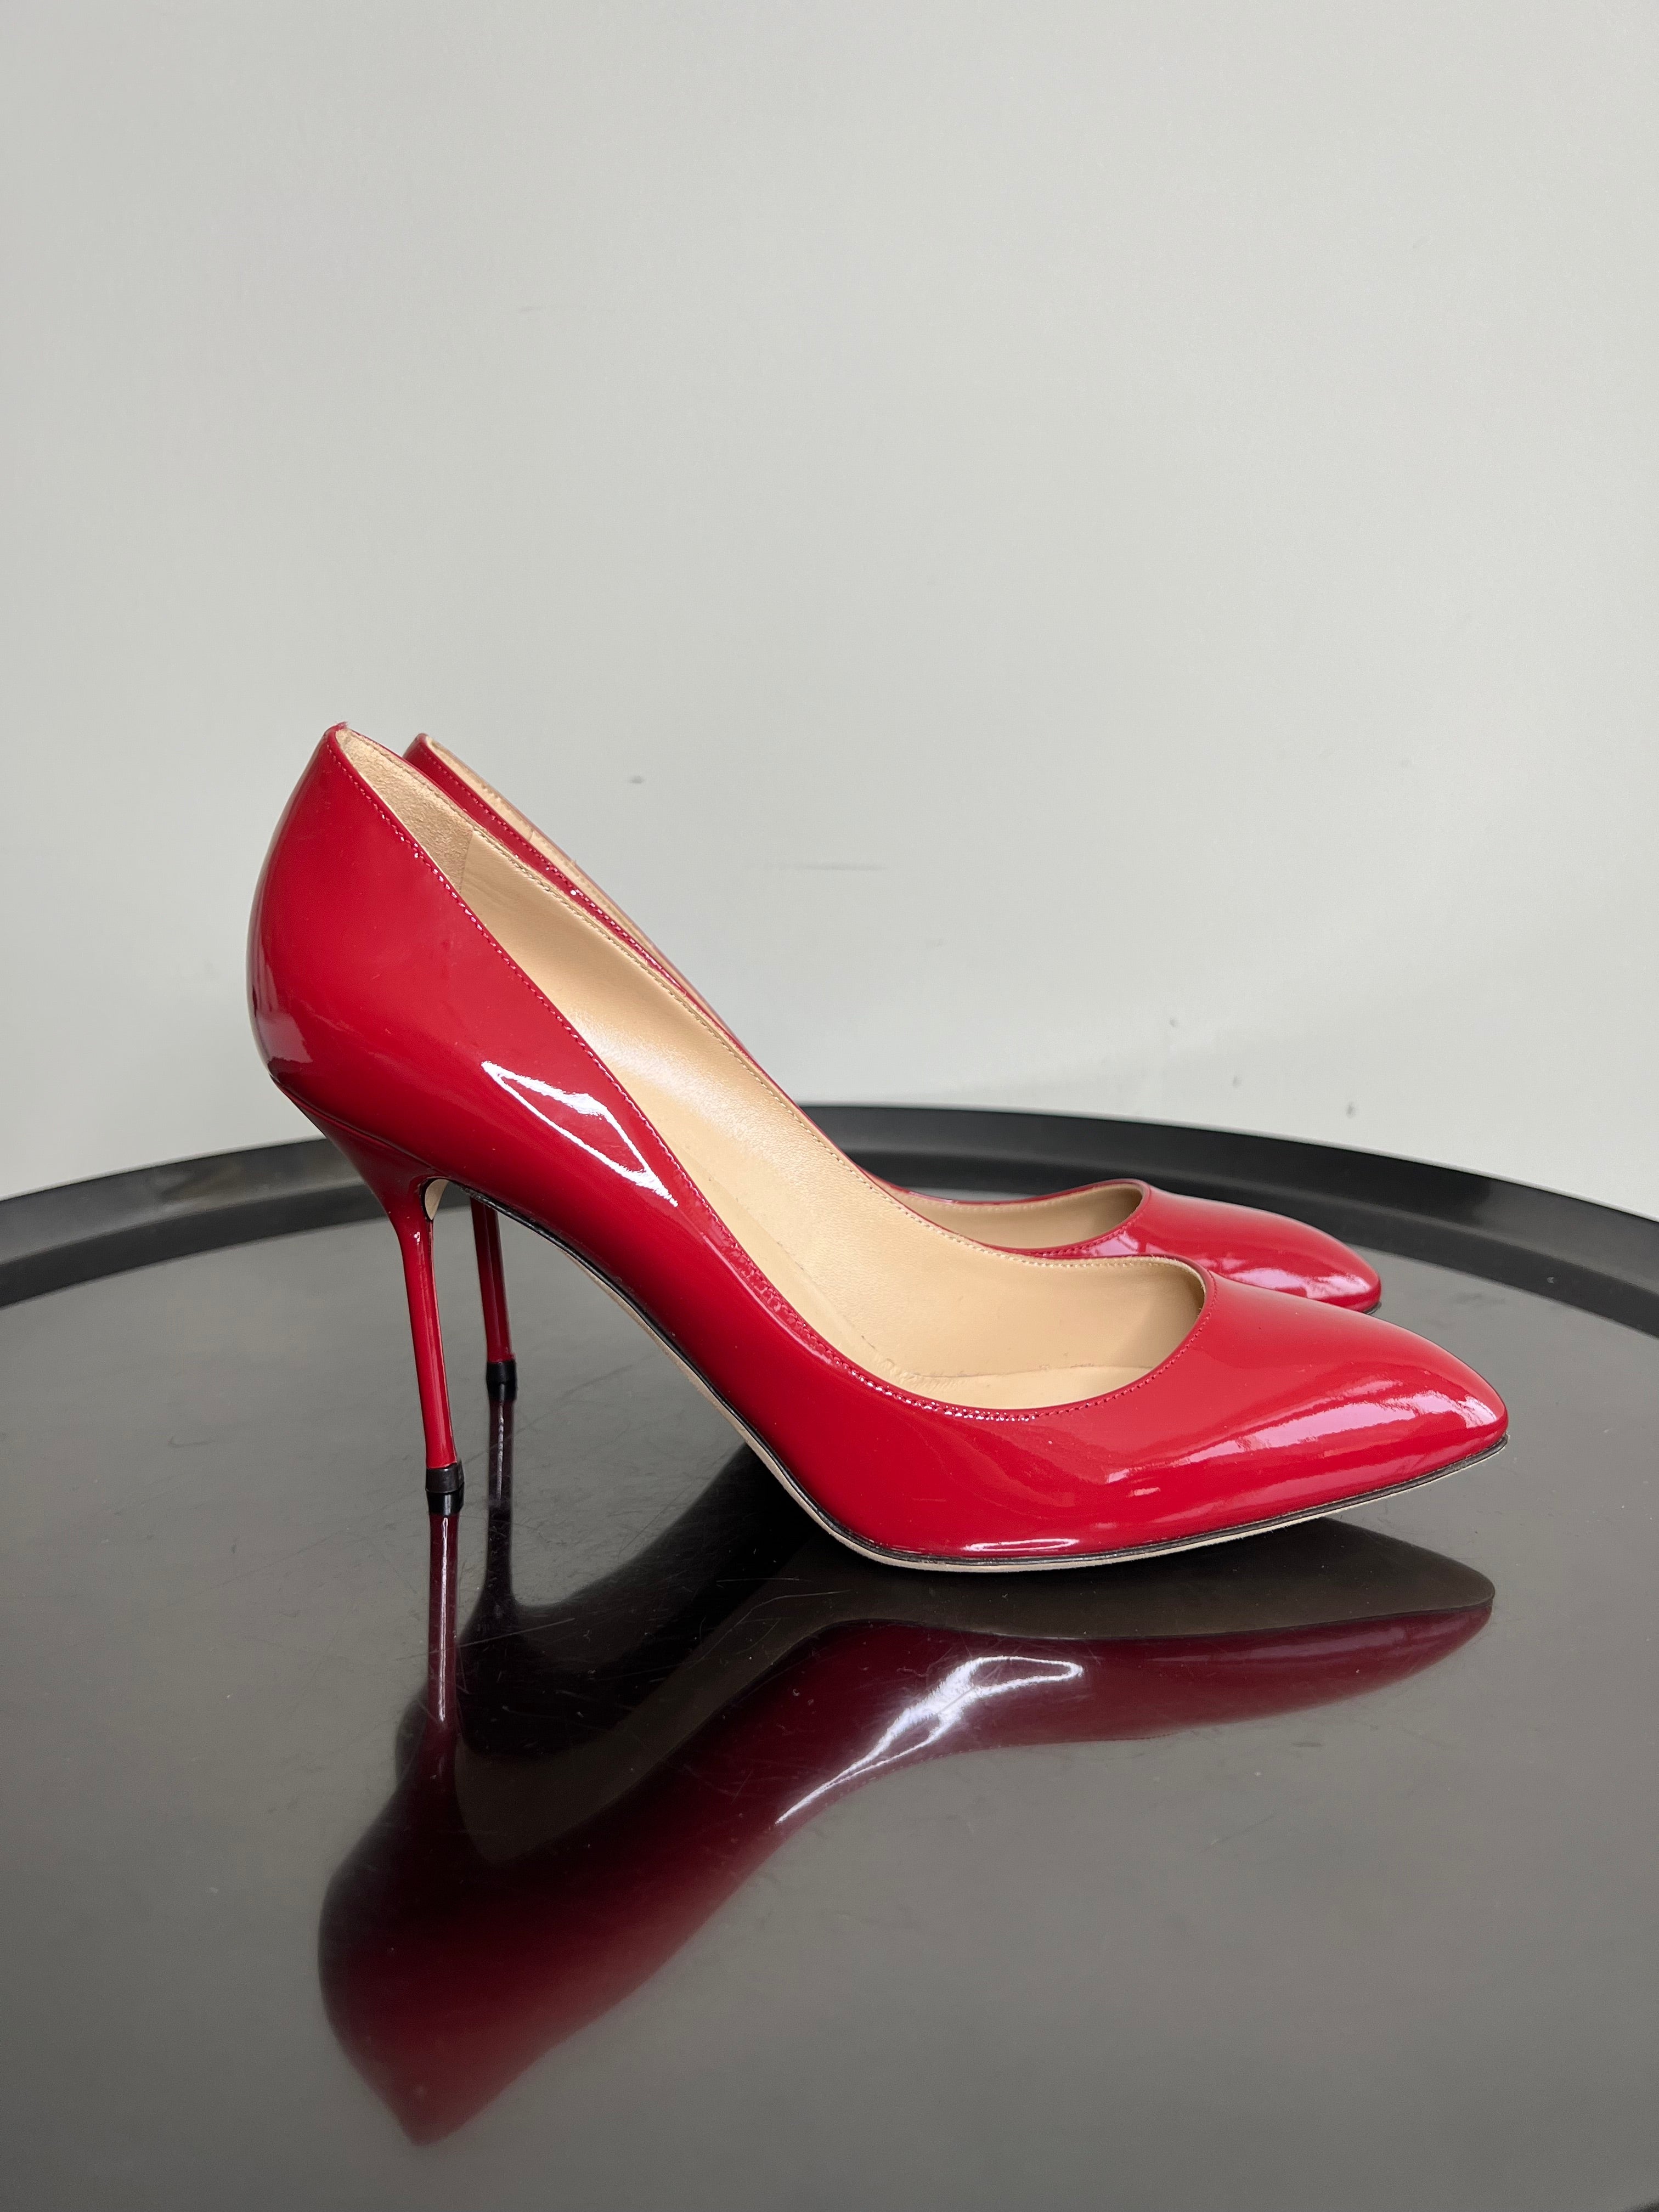 Red Patent Leather Pumps - SERGIO ROSSI